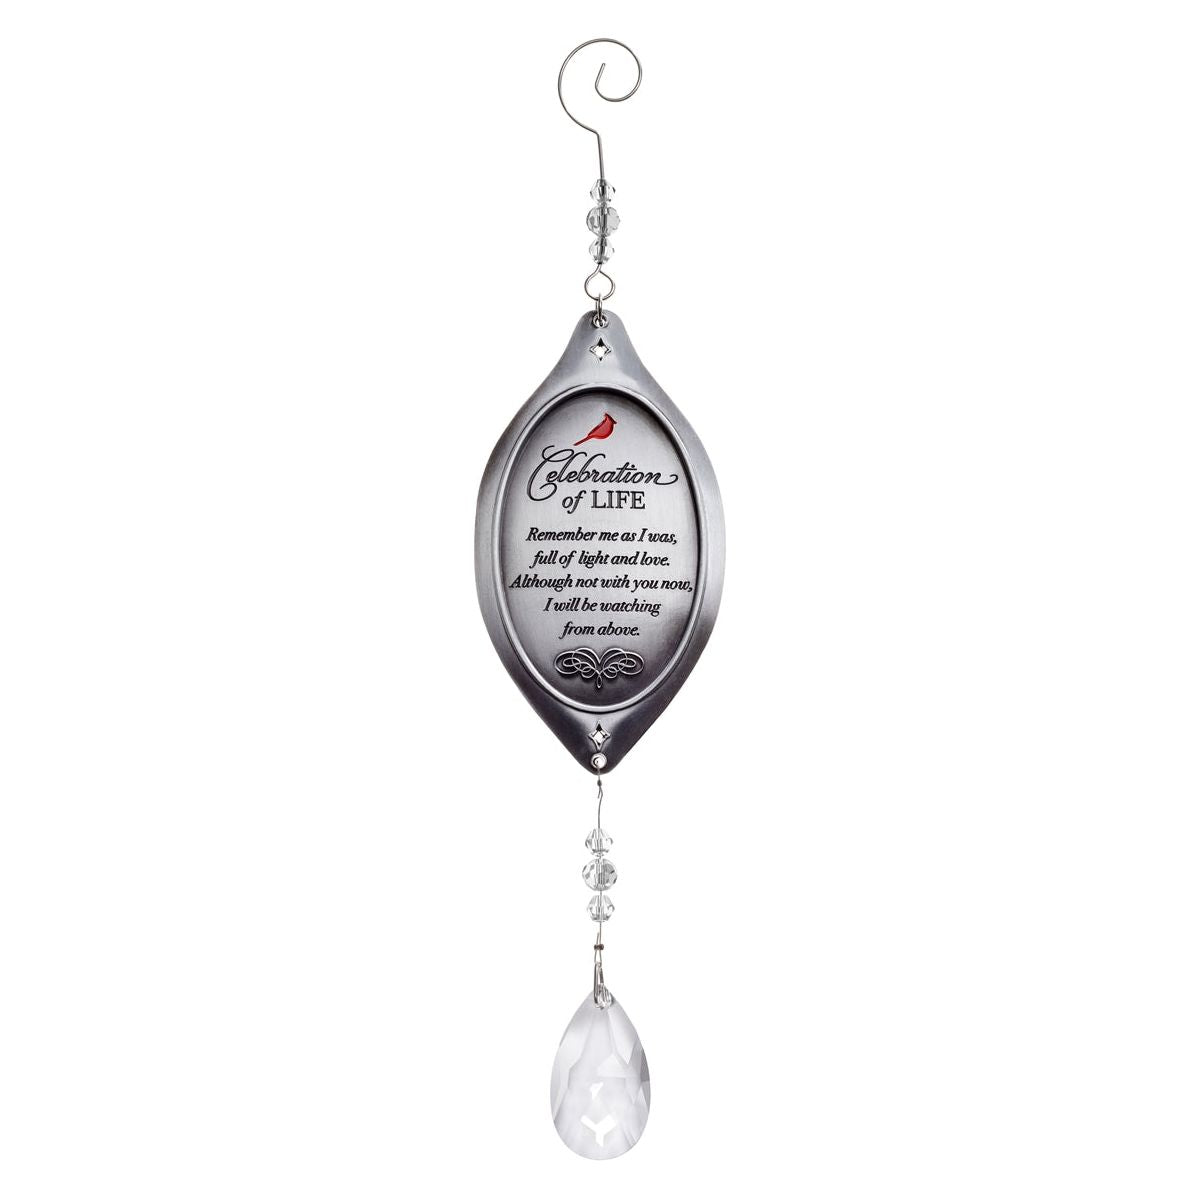 Celebration of Life Memorial Ornament- Cast metal top engraved with "Celebration of Life" sentiment and crystal pendant.